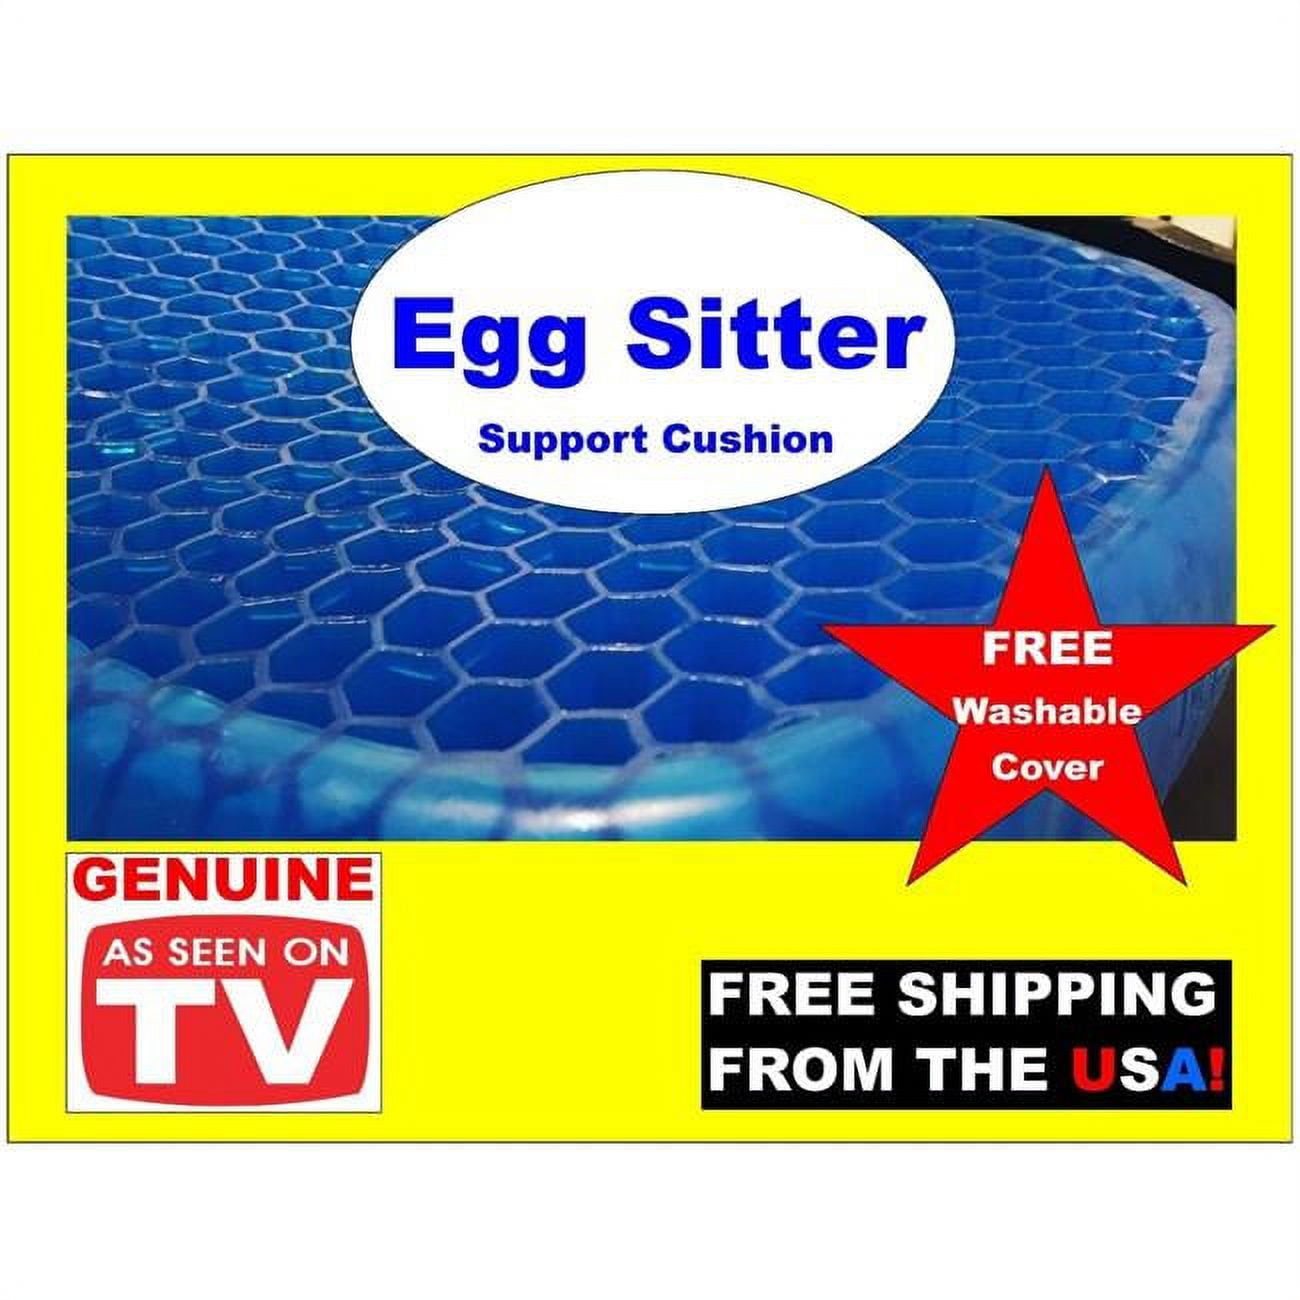 As Seen On Tv Egg Sitter Support Cushion @ Best Price Online